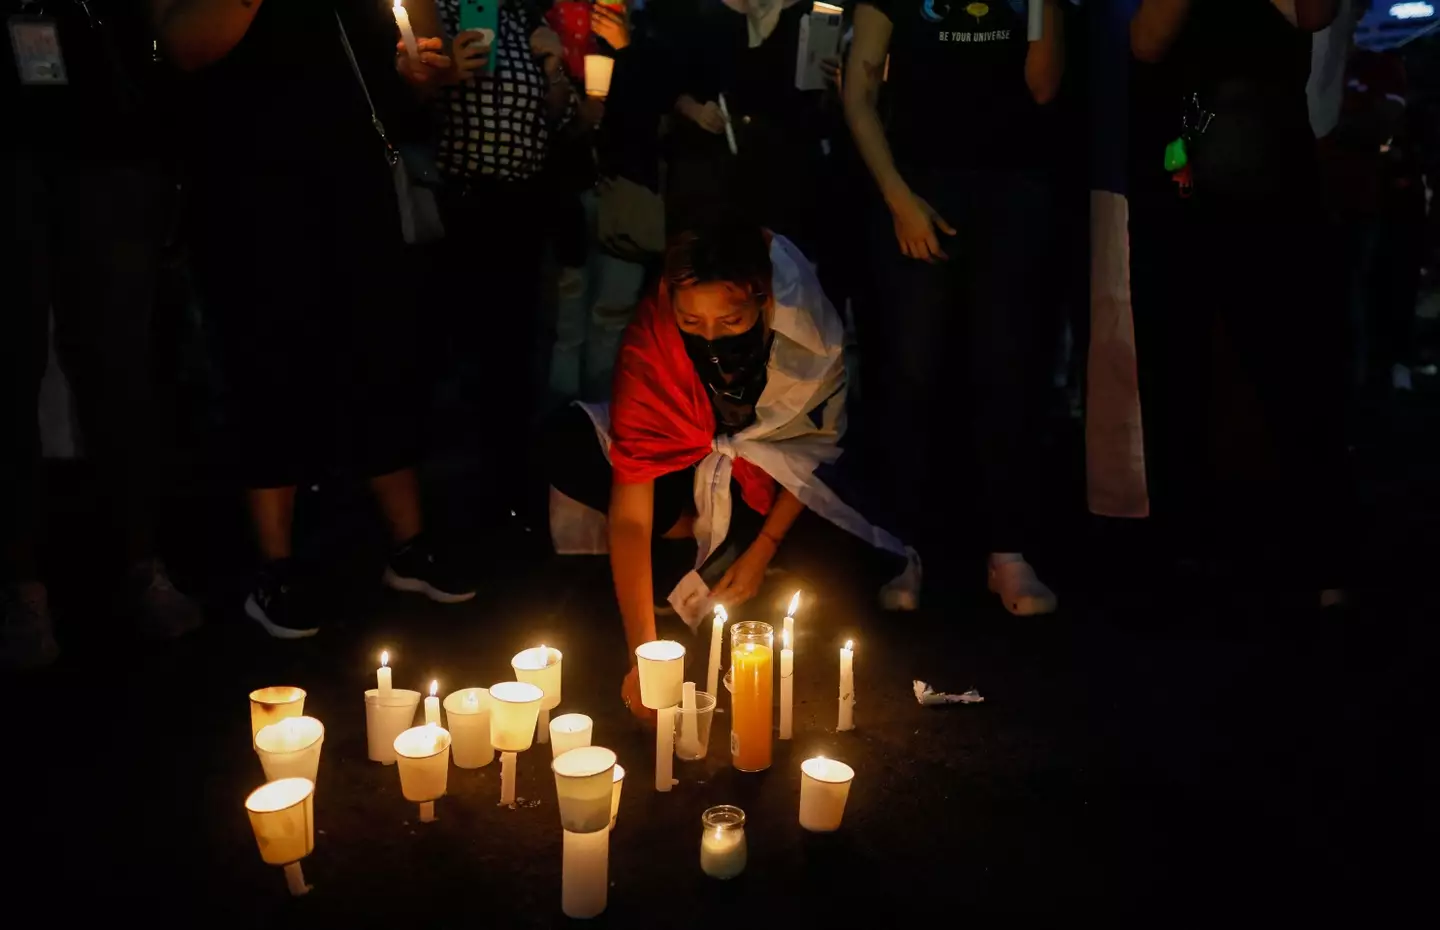 Protesters held a vigil for the two who died.